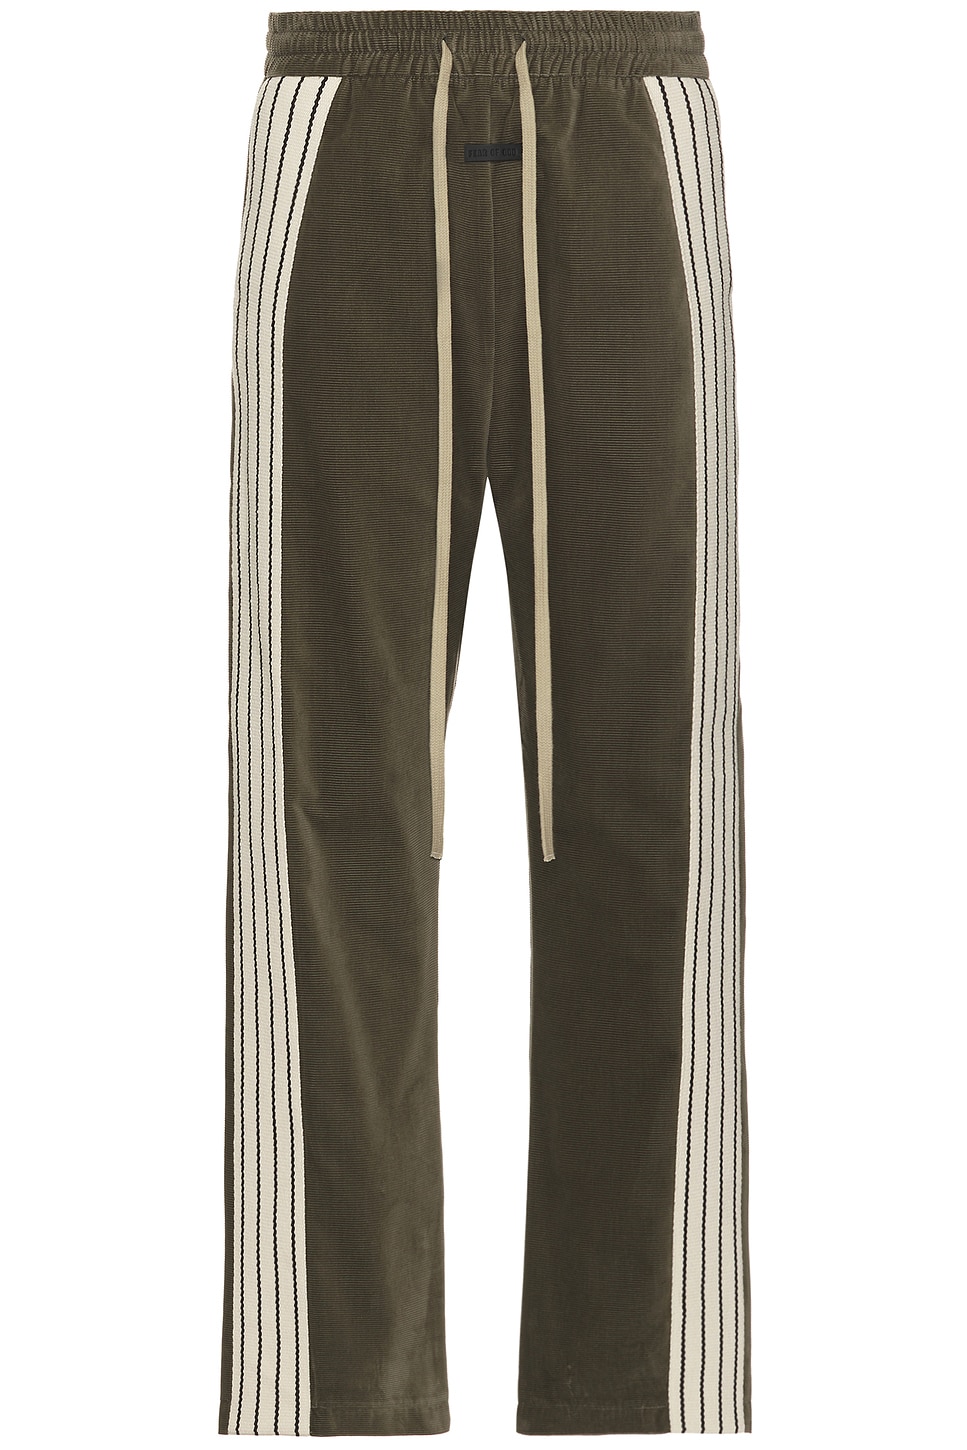 Image 1 of Fear of God Side Stripe Forum Pant in Wood